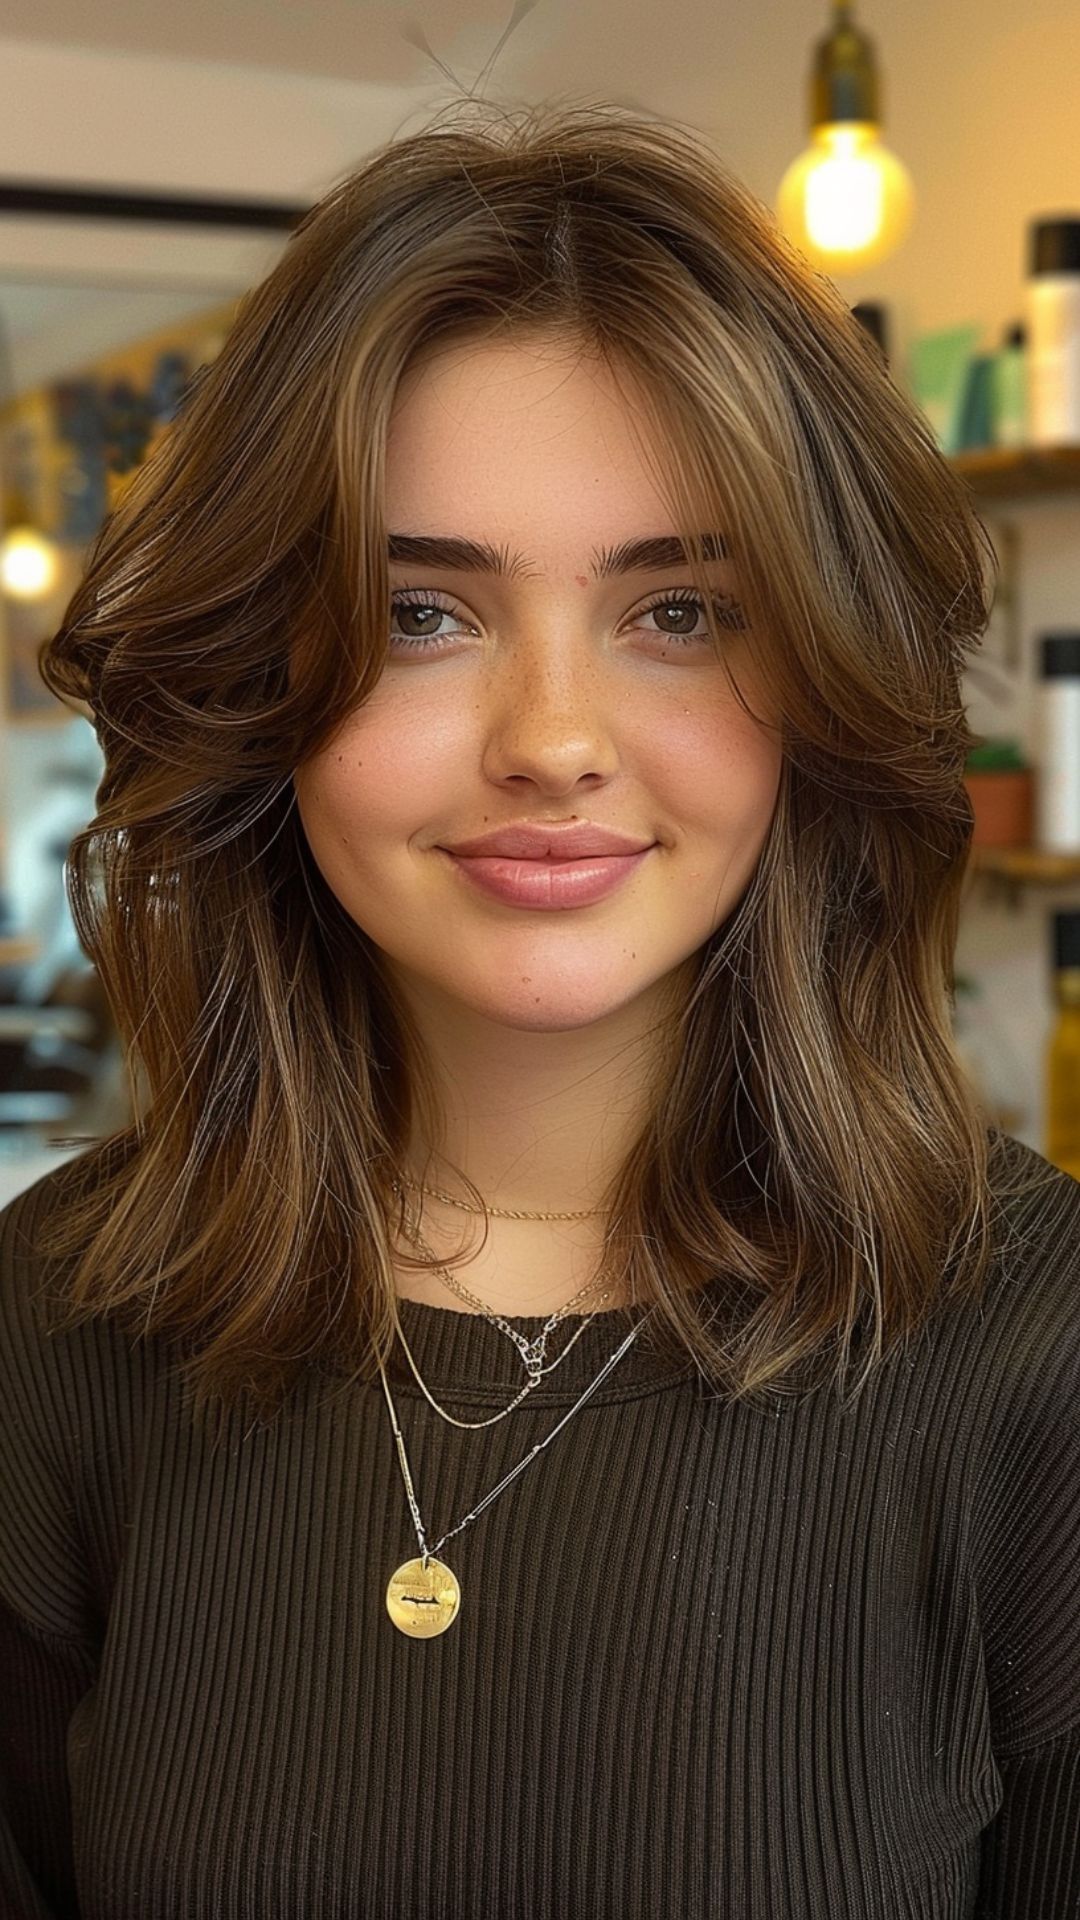 Flattering Hairstyles for Round Faces: How to Enhance Your Features with the Perfect Cut